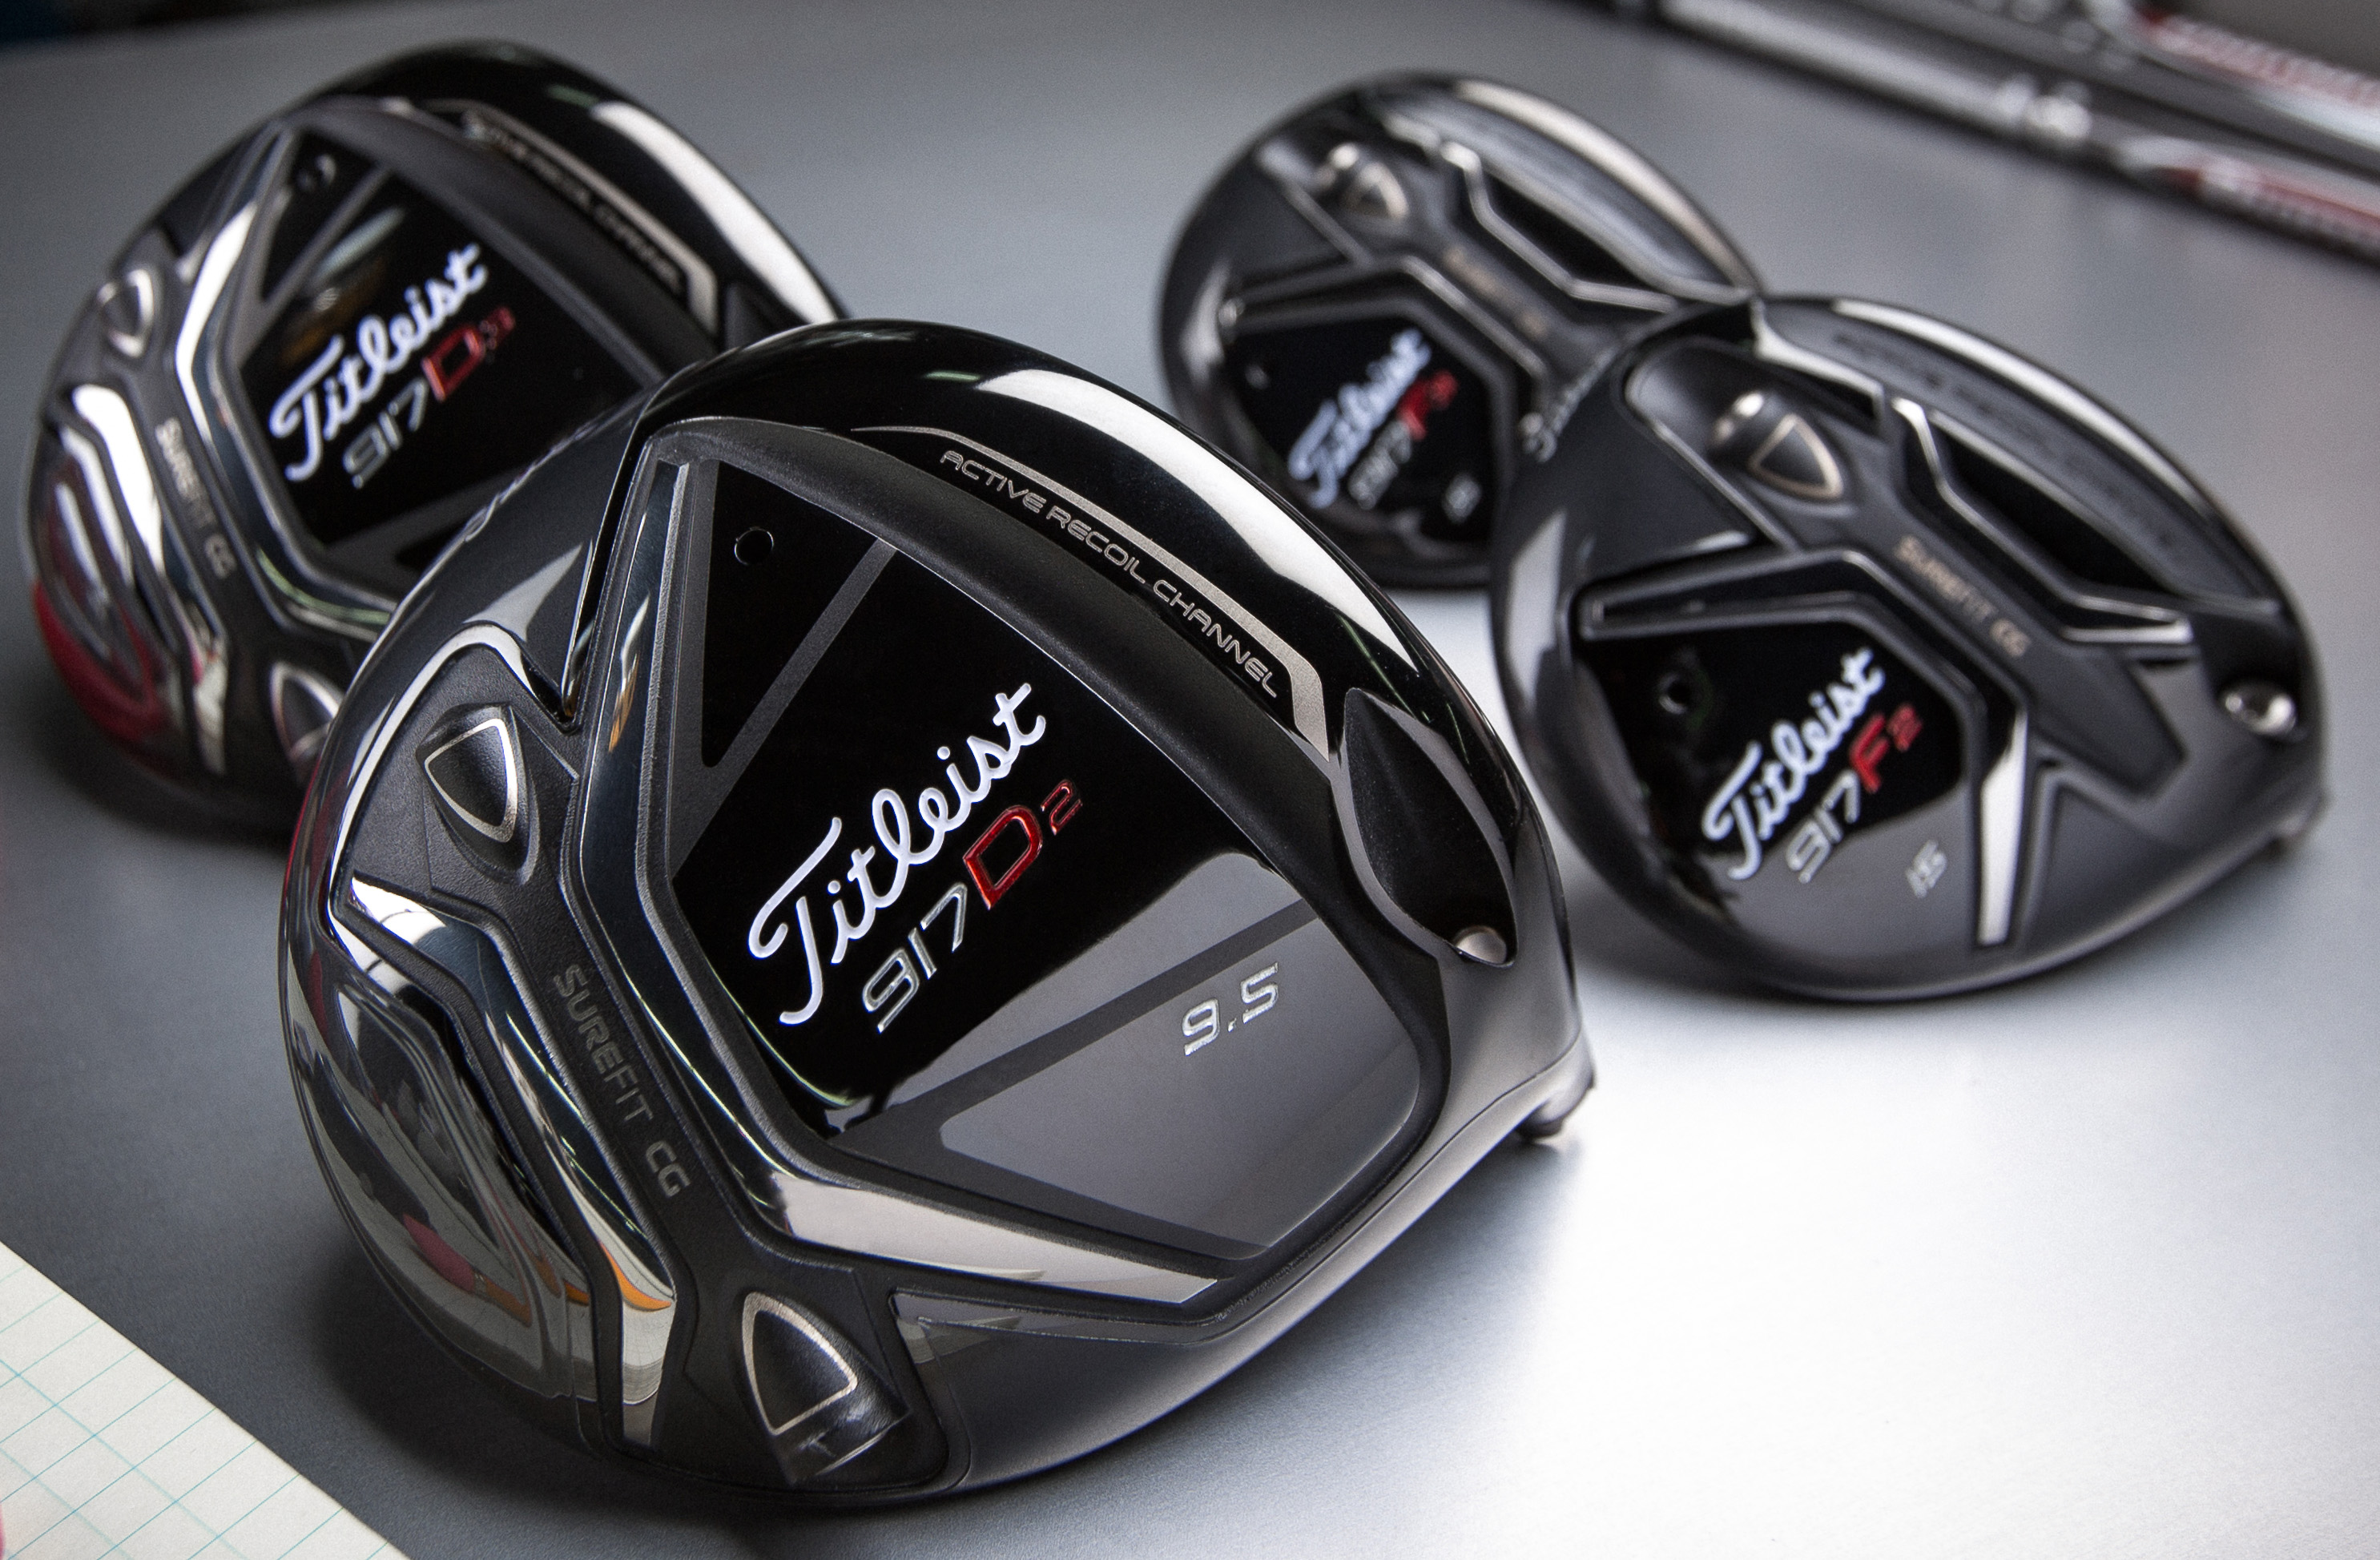 New Titleist 917 metalwoods add adjustable sole weight | This is